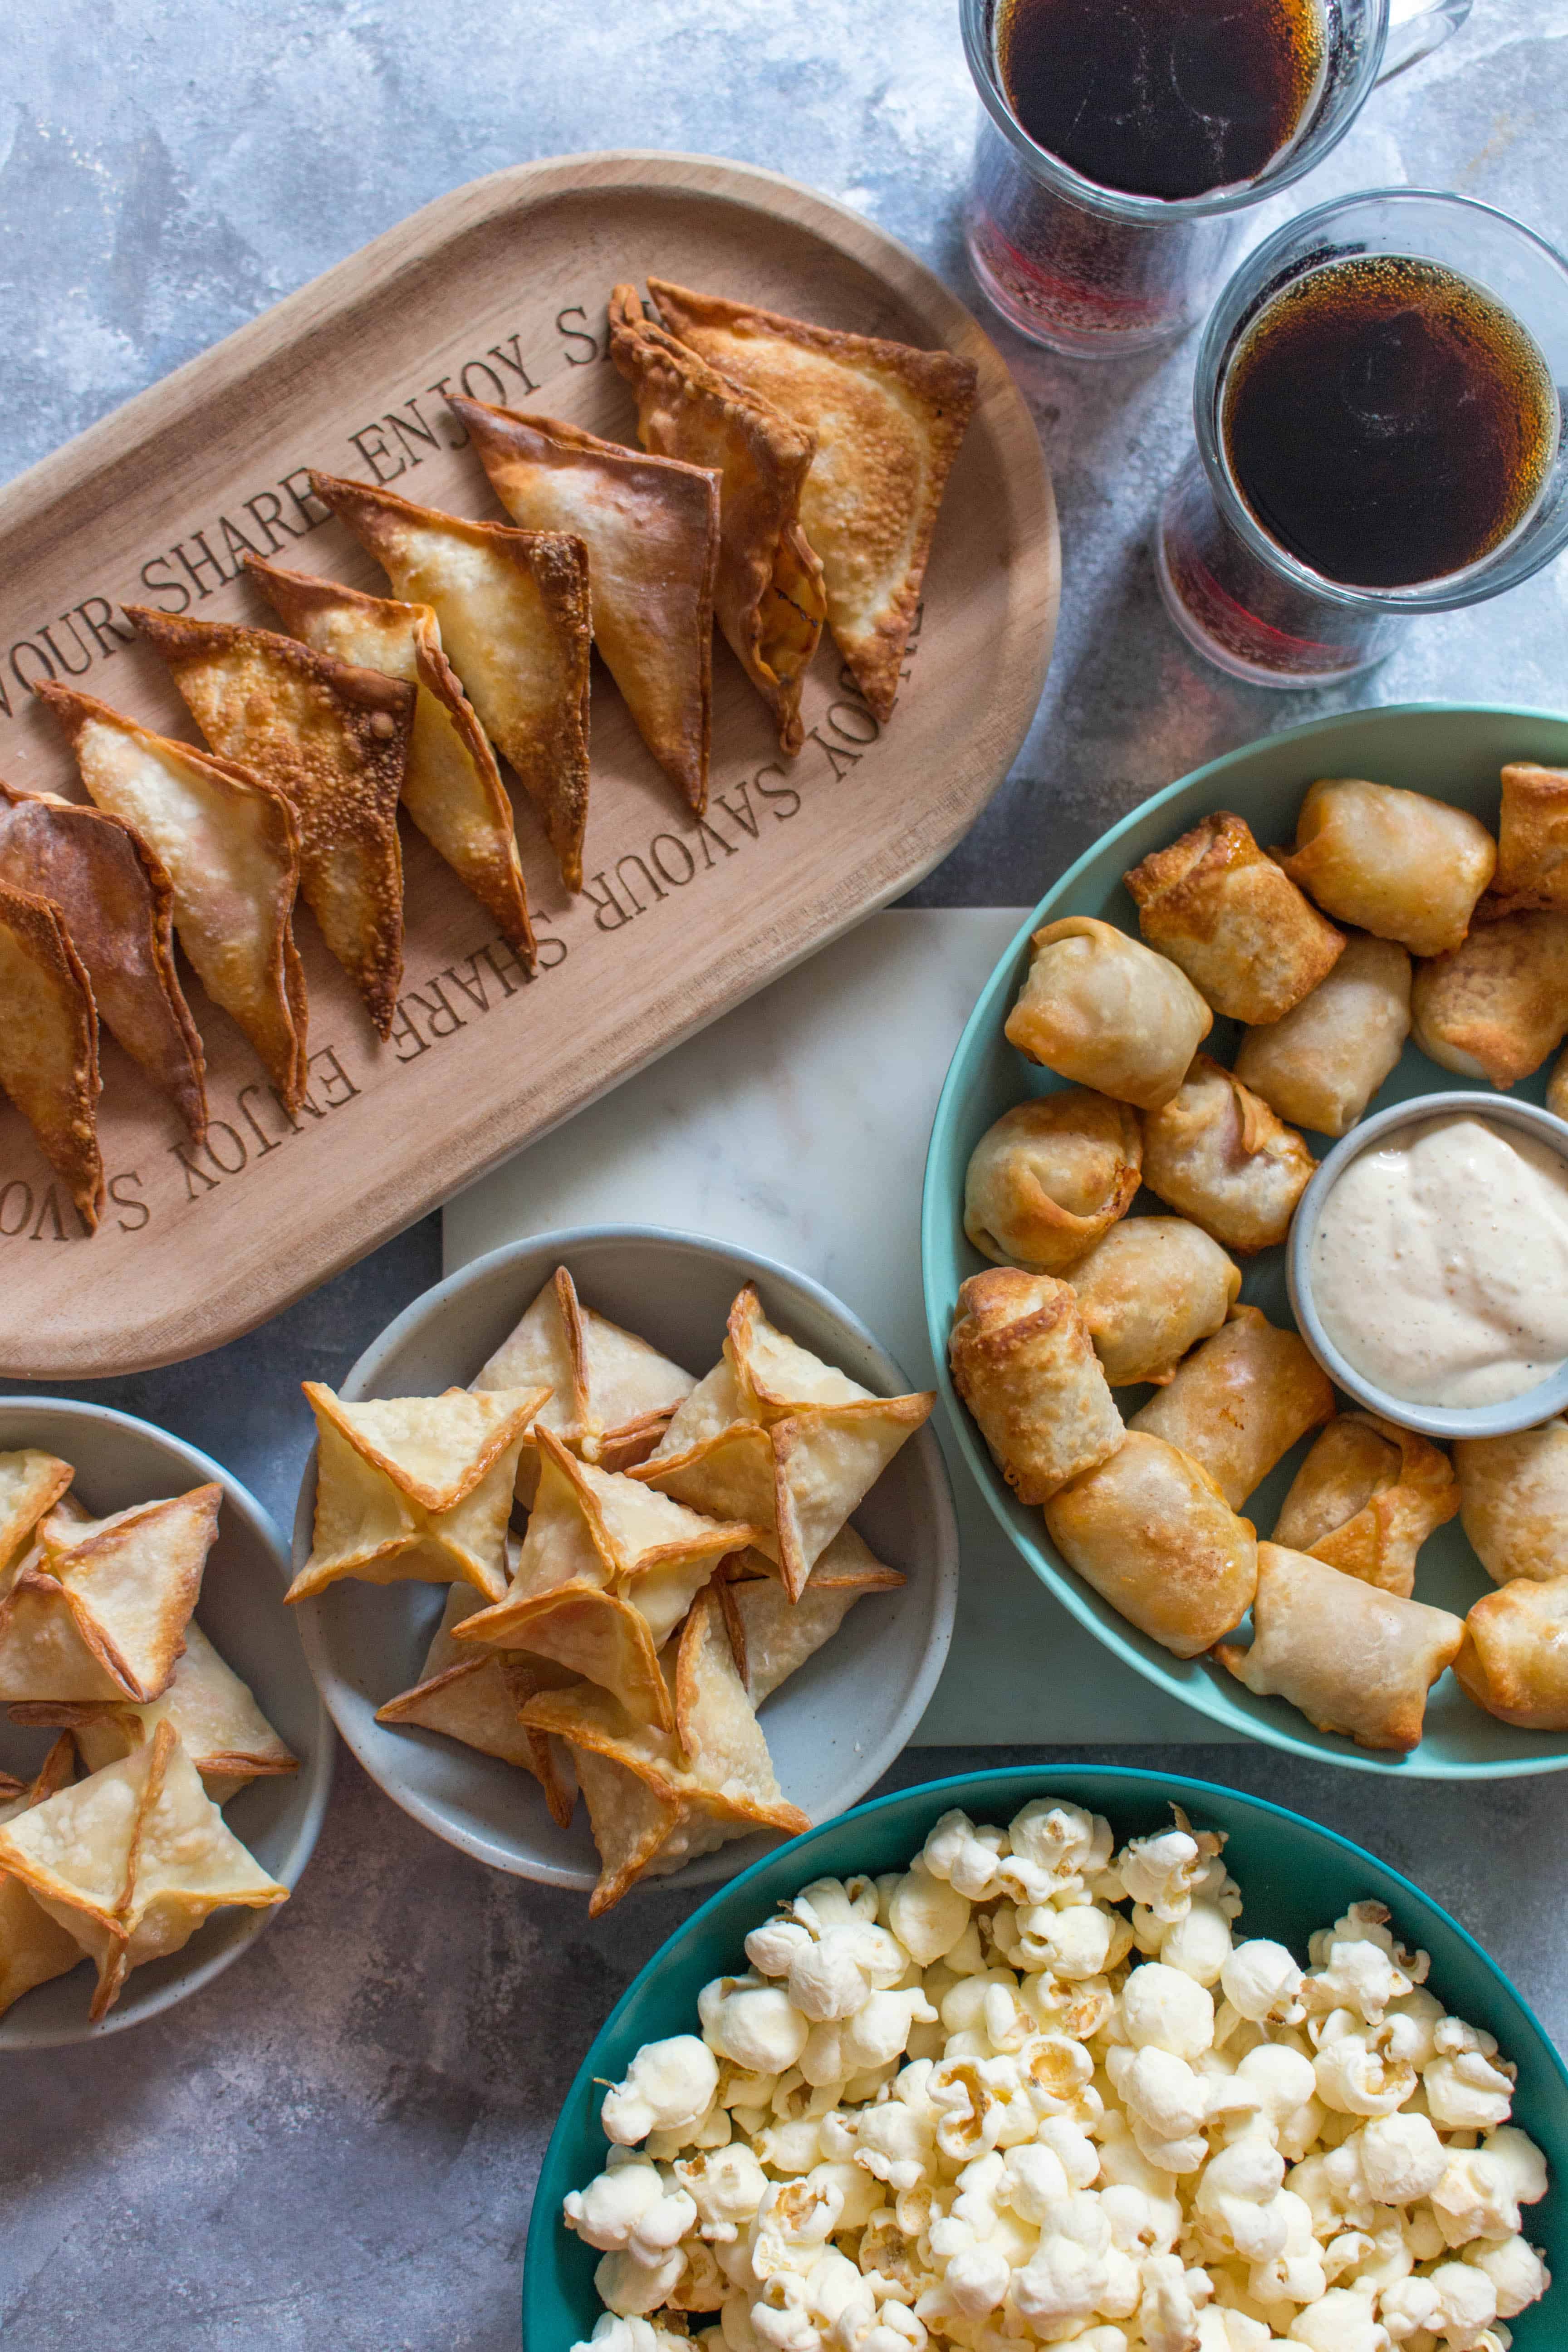 Do you often crave that crunch from deep fried foods while watching the game on TV? Want an healthier alternative that's not carrot sticks? Try these party snacks: wontons 3 ways with an Air Fryer! The perfect little bites!